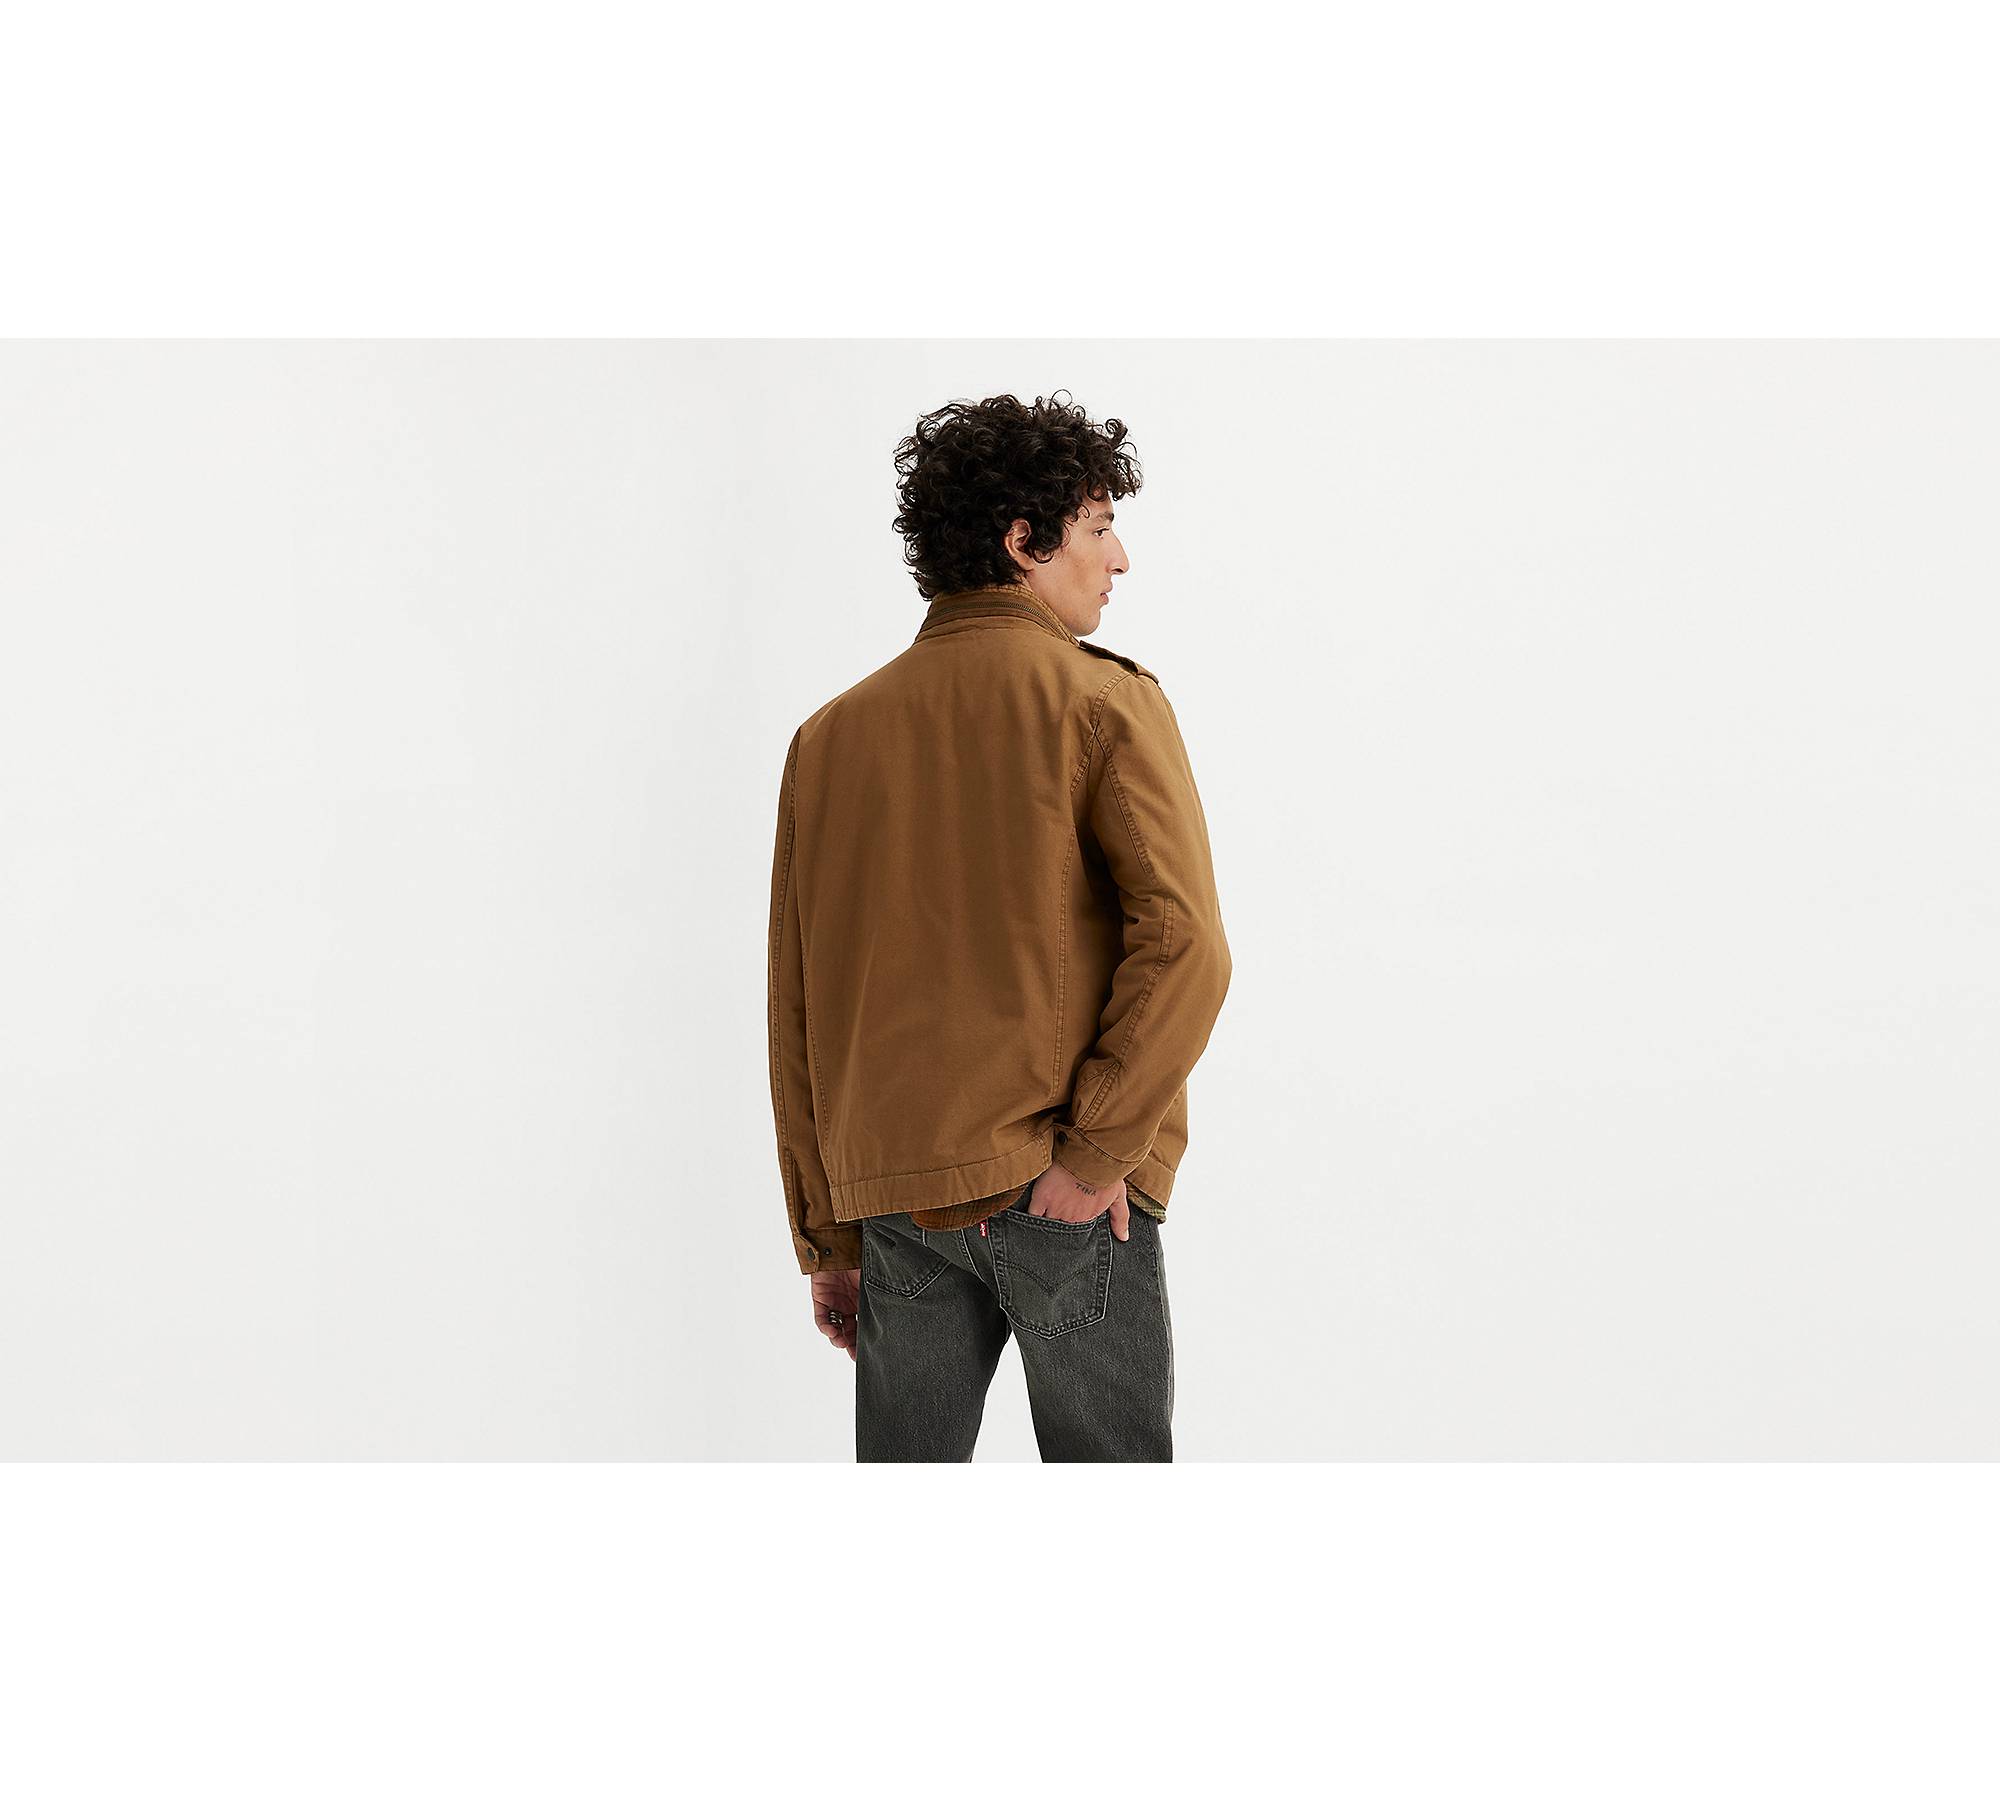 Levi's Men's Washed Cotton Military Jacket, Worker Brown, Large